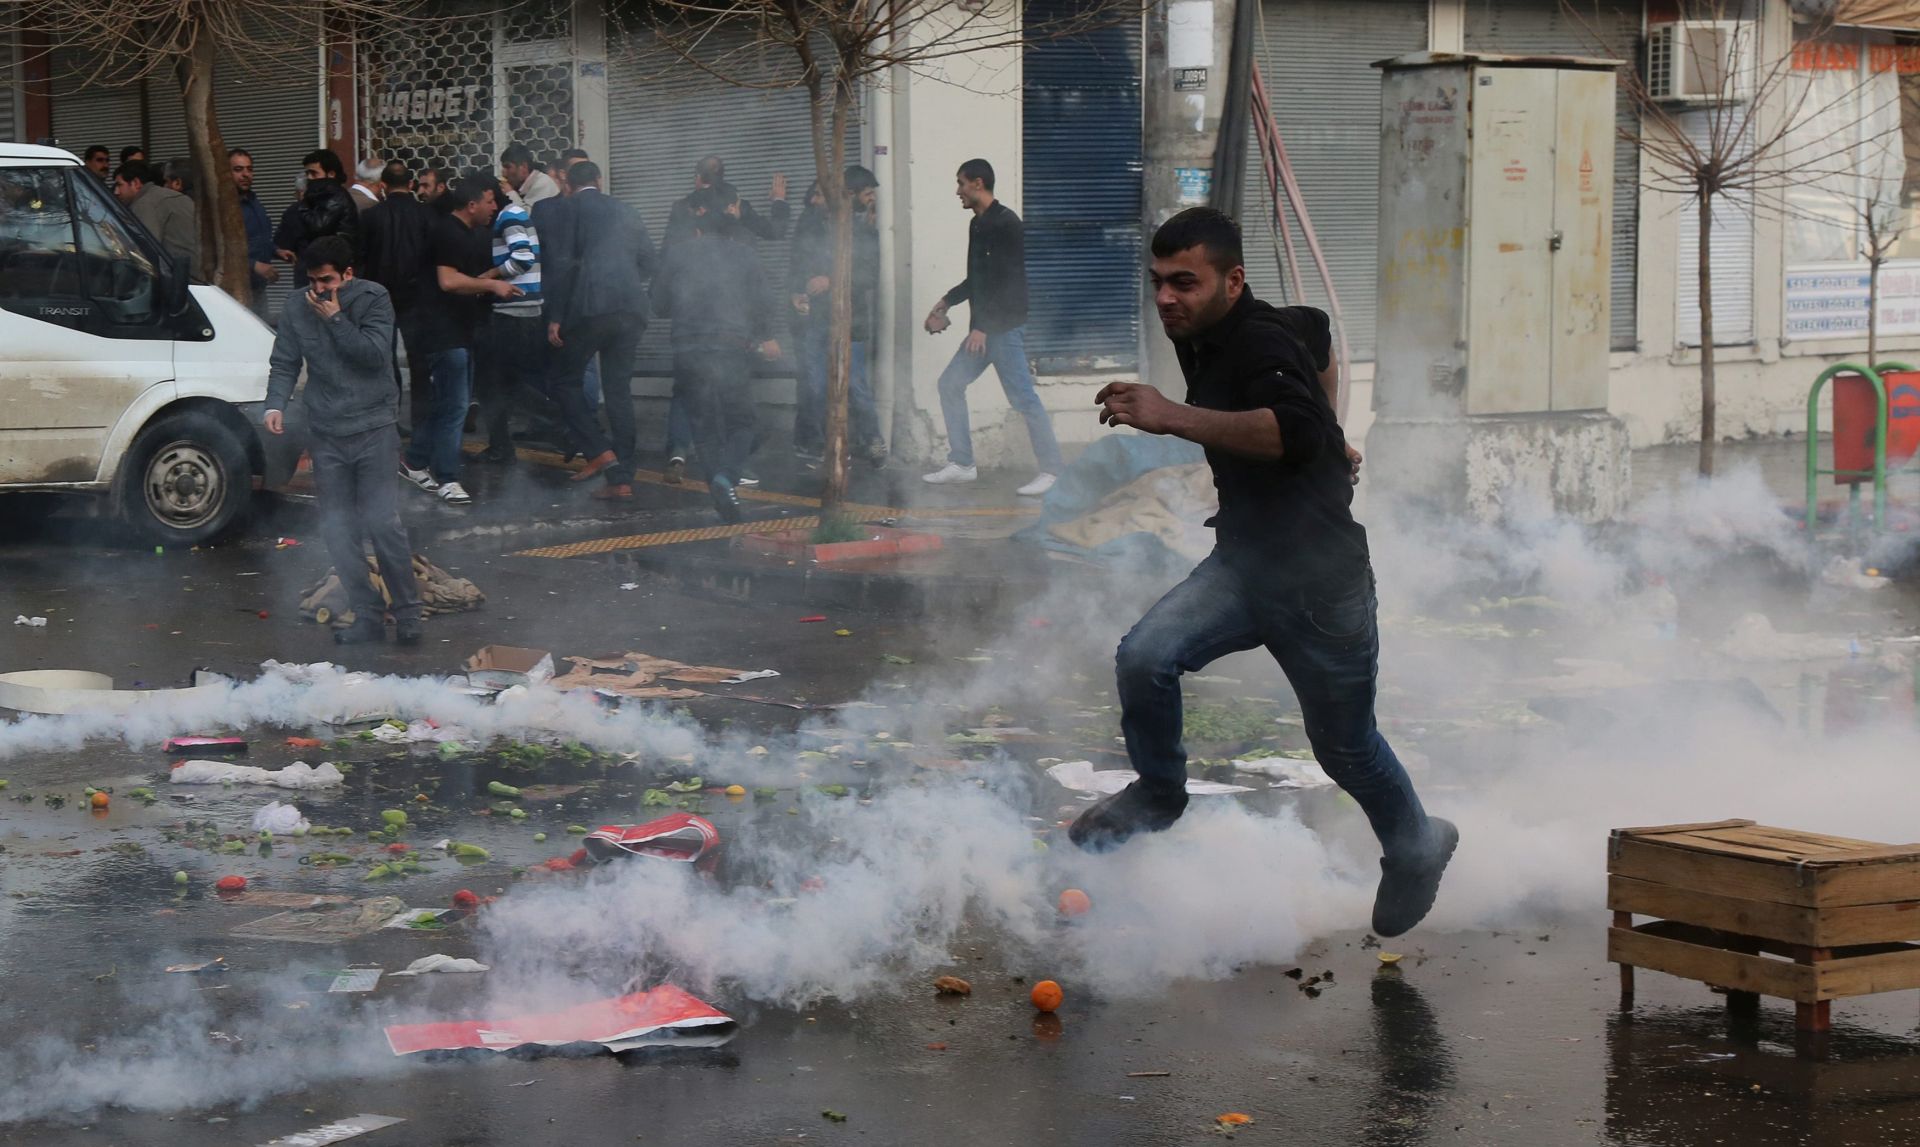 epa05191034 Kurdish protestors clash with Turkish riot police during a protest against the Turkish Government's ongoing security operations in the east of Turkey, in Diyarbakir, Turkey, 27 February 2016. The Turkish police used plastic bullets, tear gas and water cannons on demonstrators protesting a curfew in the largely Kurdish city of Diyarbakir. Thousands of protesters continued marching towards the city's Sur district, which has been under curfew since December, Feleknas Uca, a pro-Kurdish opposition party representative in Diyarbakir said.  EPA/STR